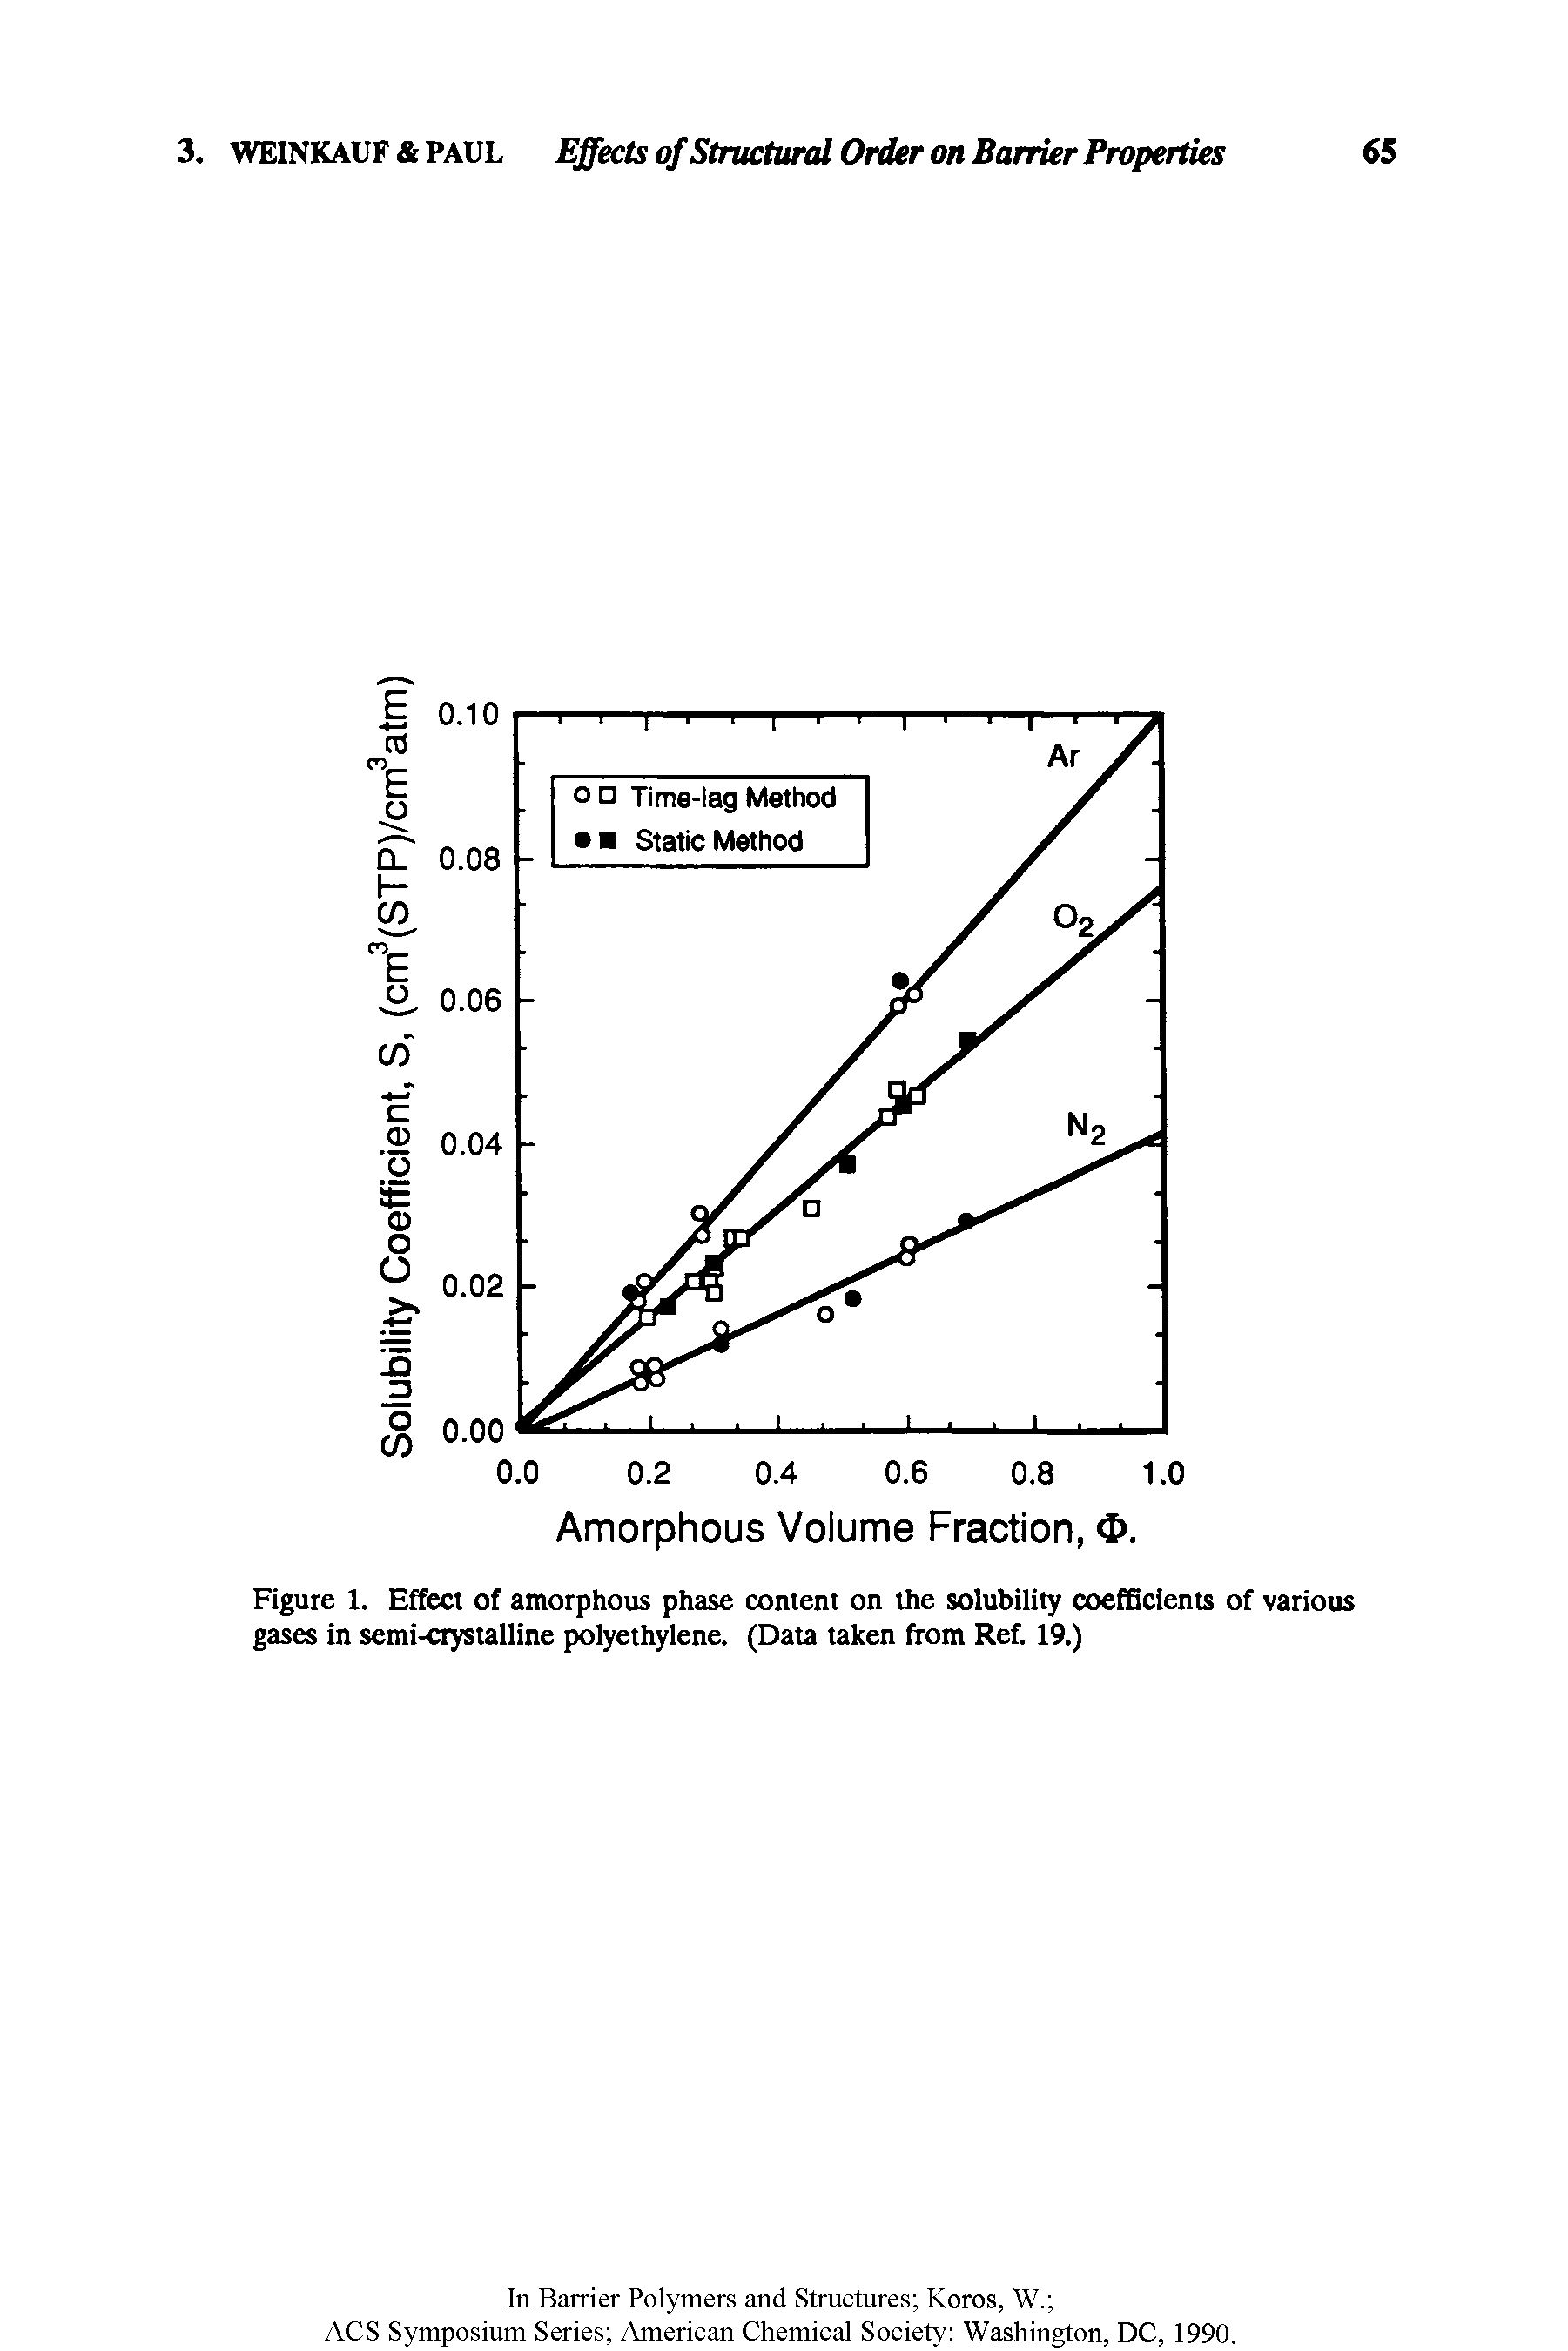 Figure X. Effect of amorphous phase content on the solubility coefficients of various gases in semi-crystalline polyethylene. (Data taken from Ref. 19.)...